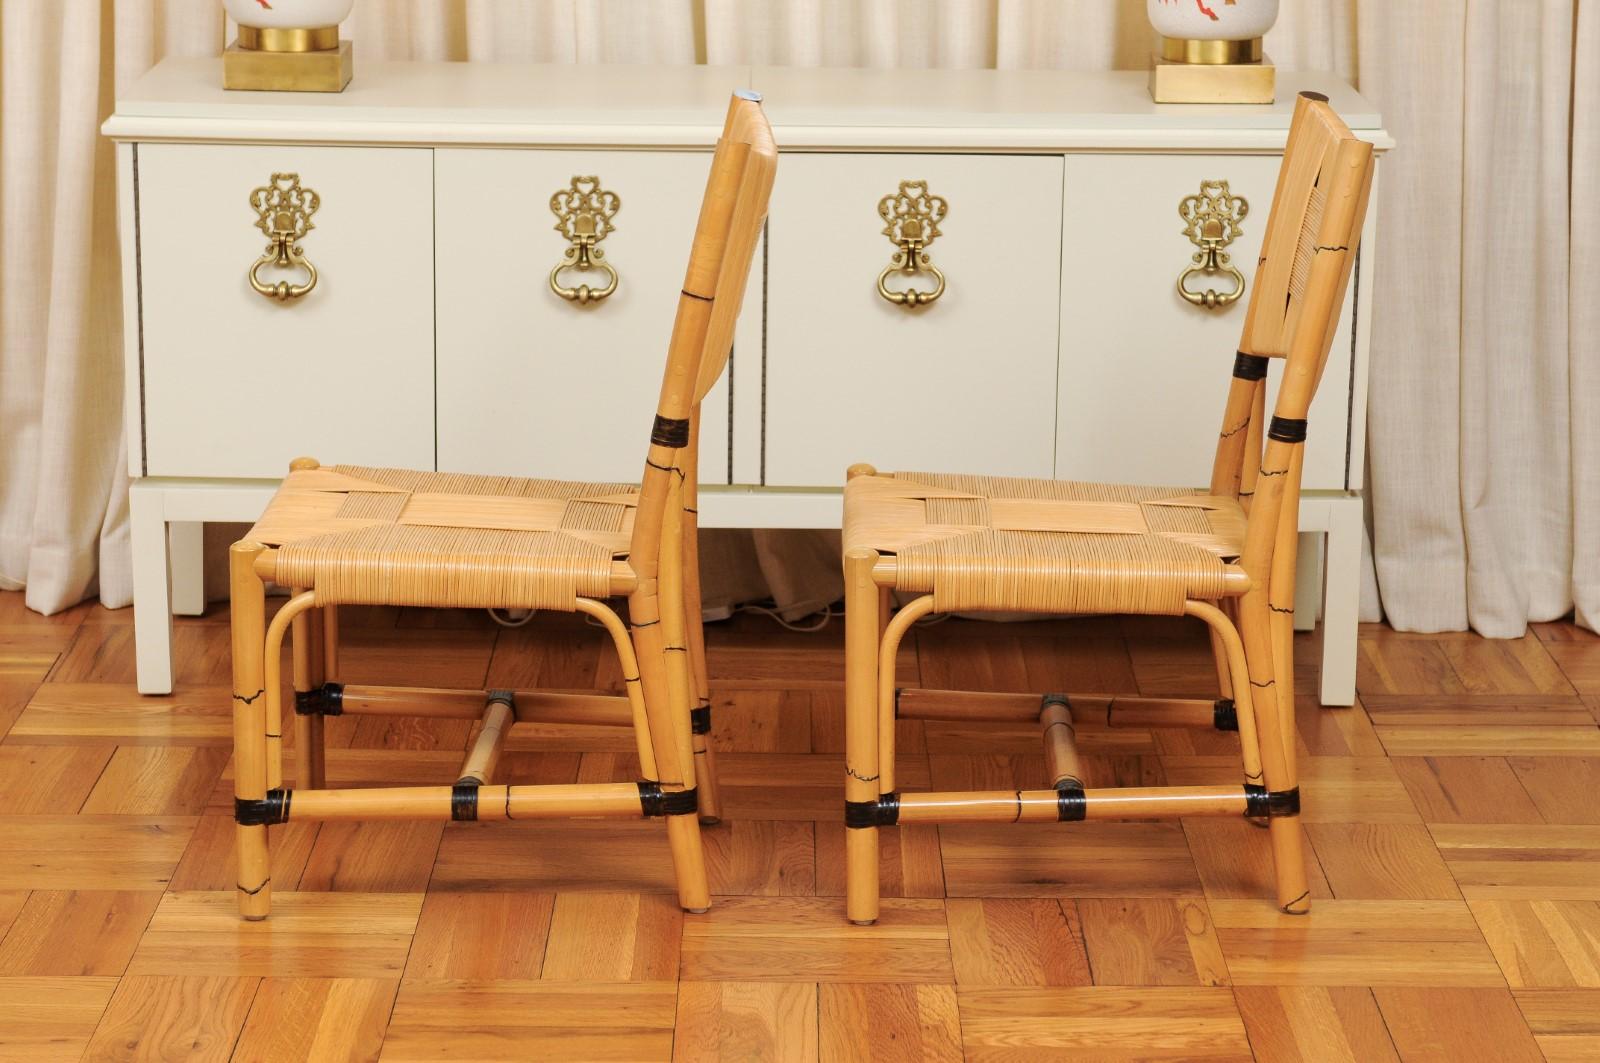 Superb Set of 8 Rush Rattan Dining Chairs by John Hutton for Donghia, circa 1995 For Sale 5